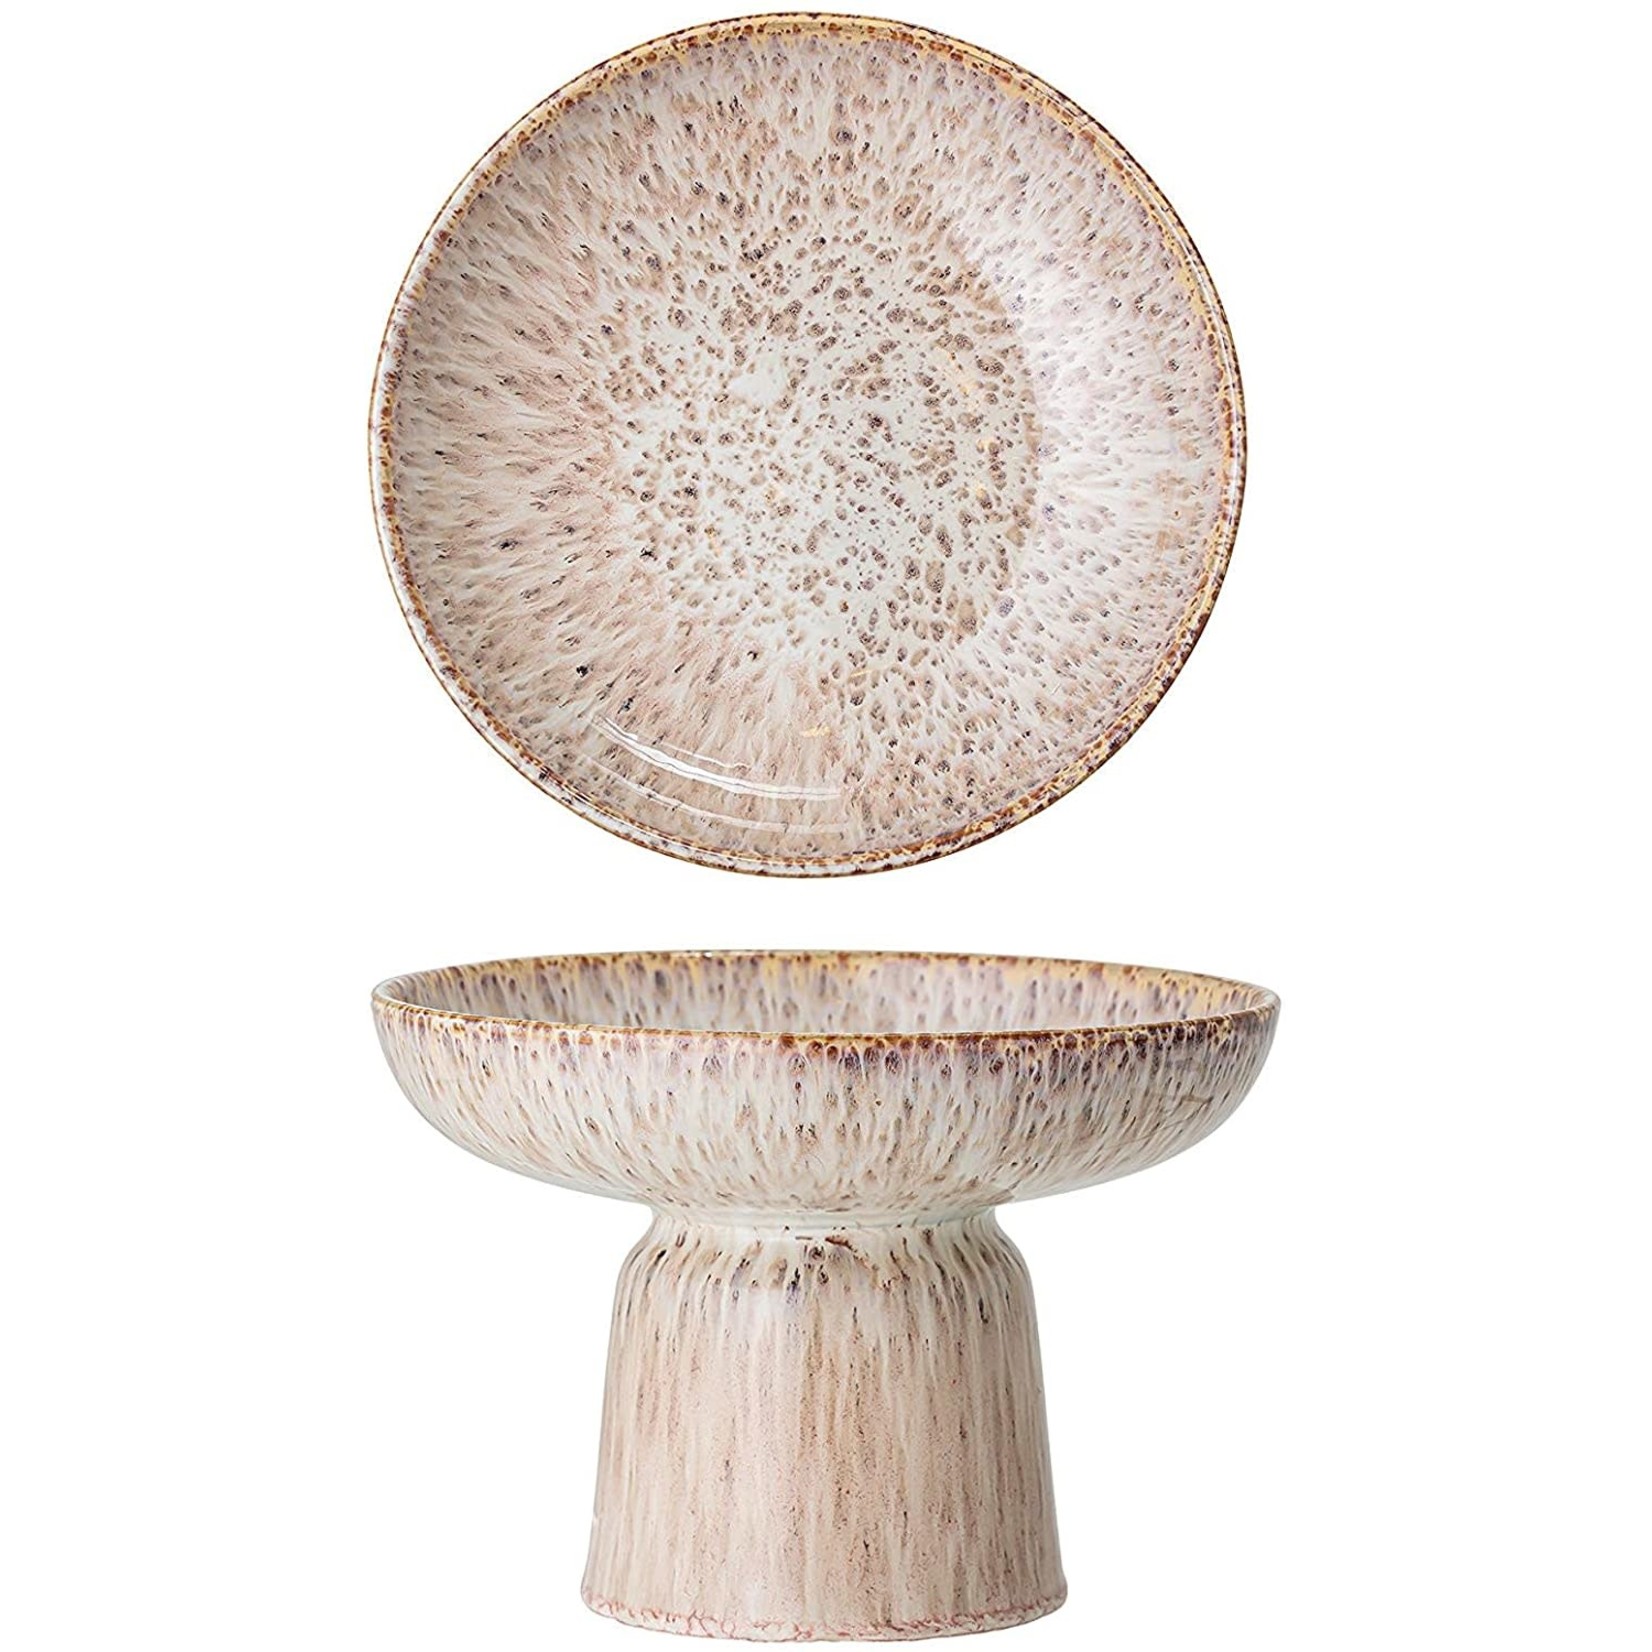 BLOOMINGVILLE ROUND FOOTED STONEWARE